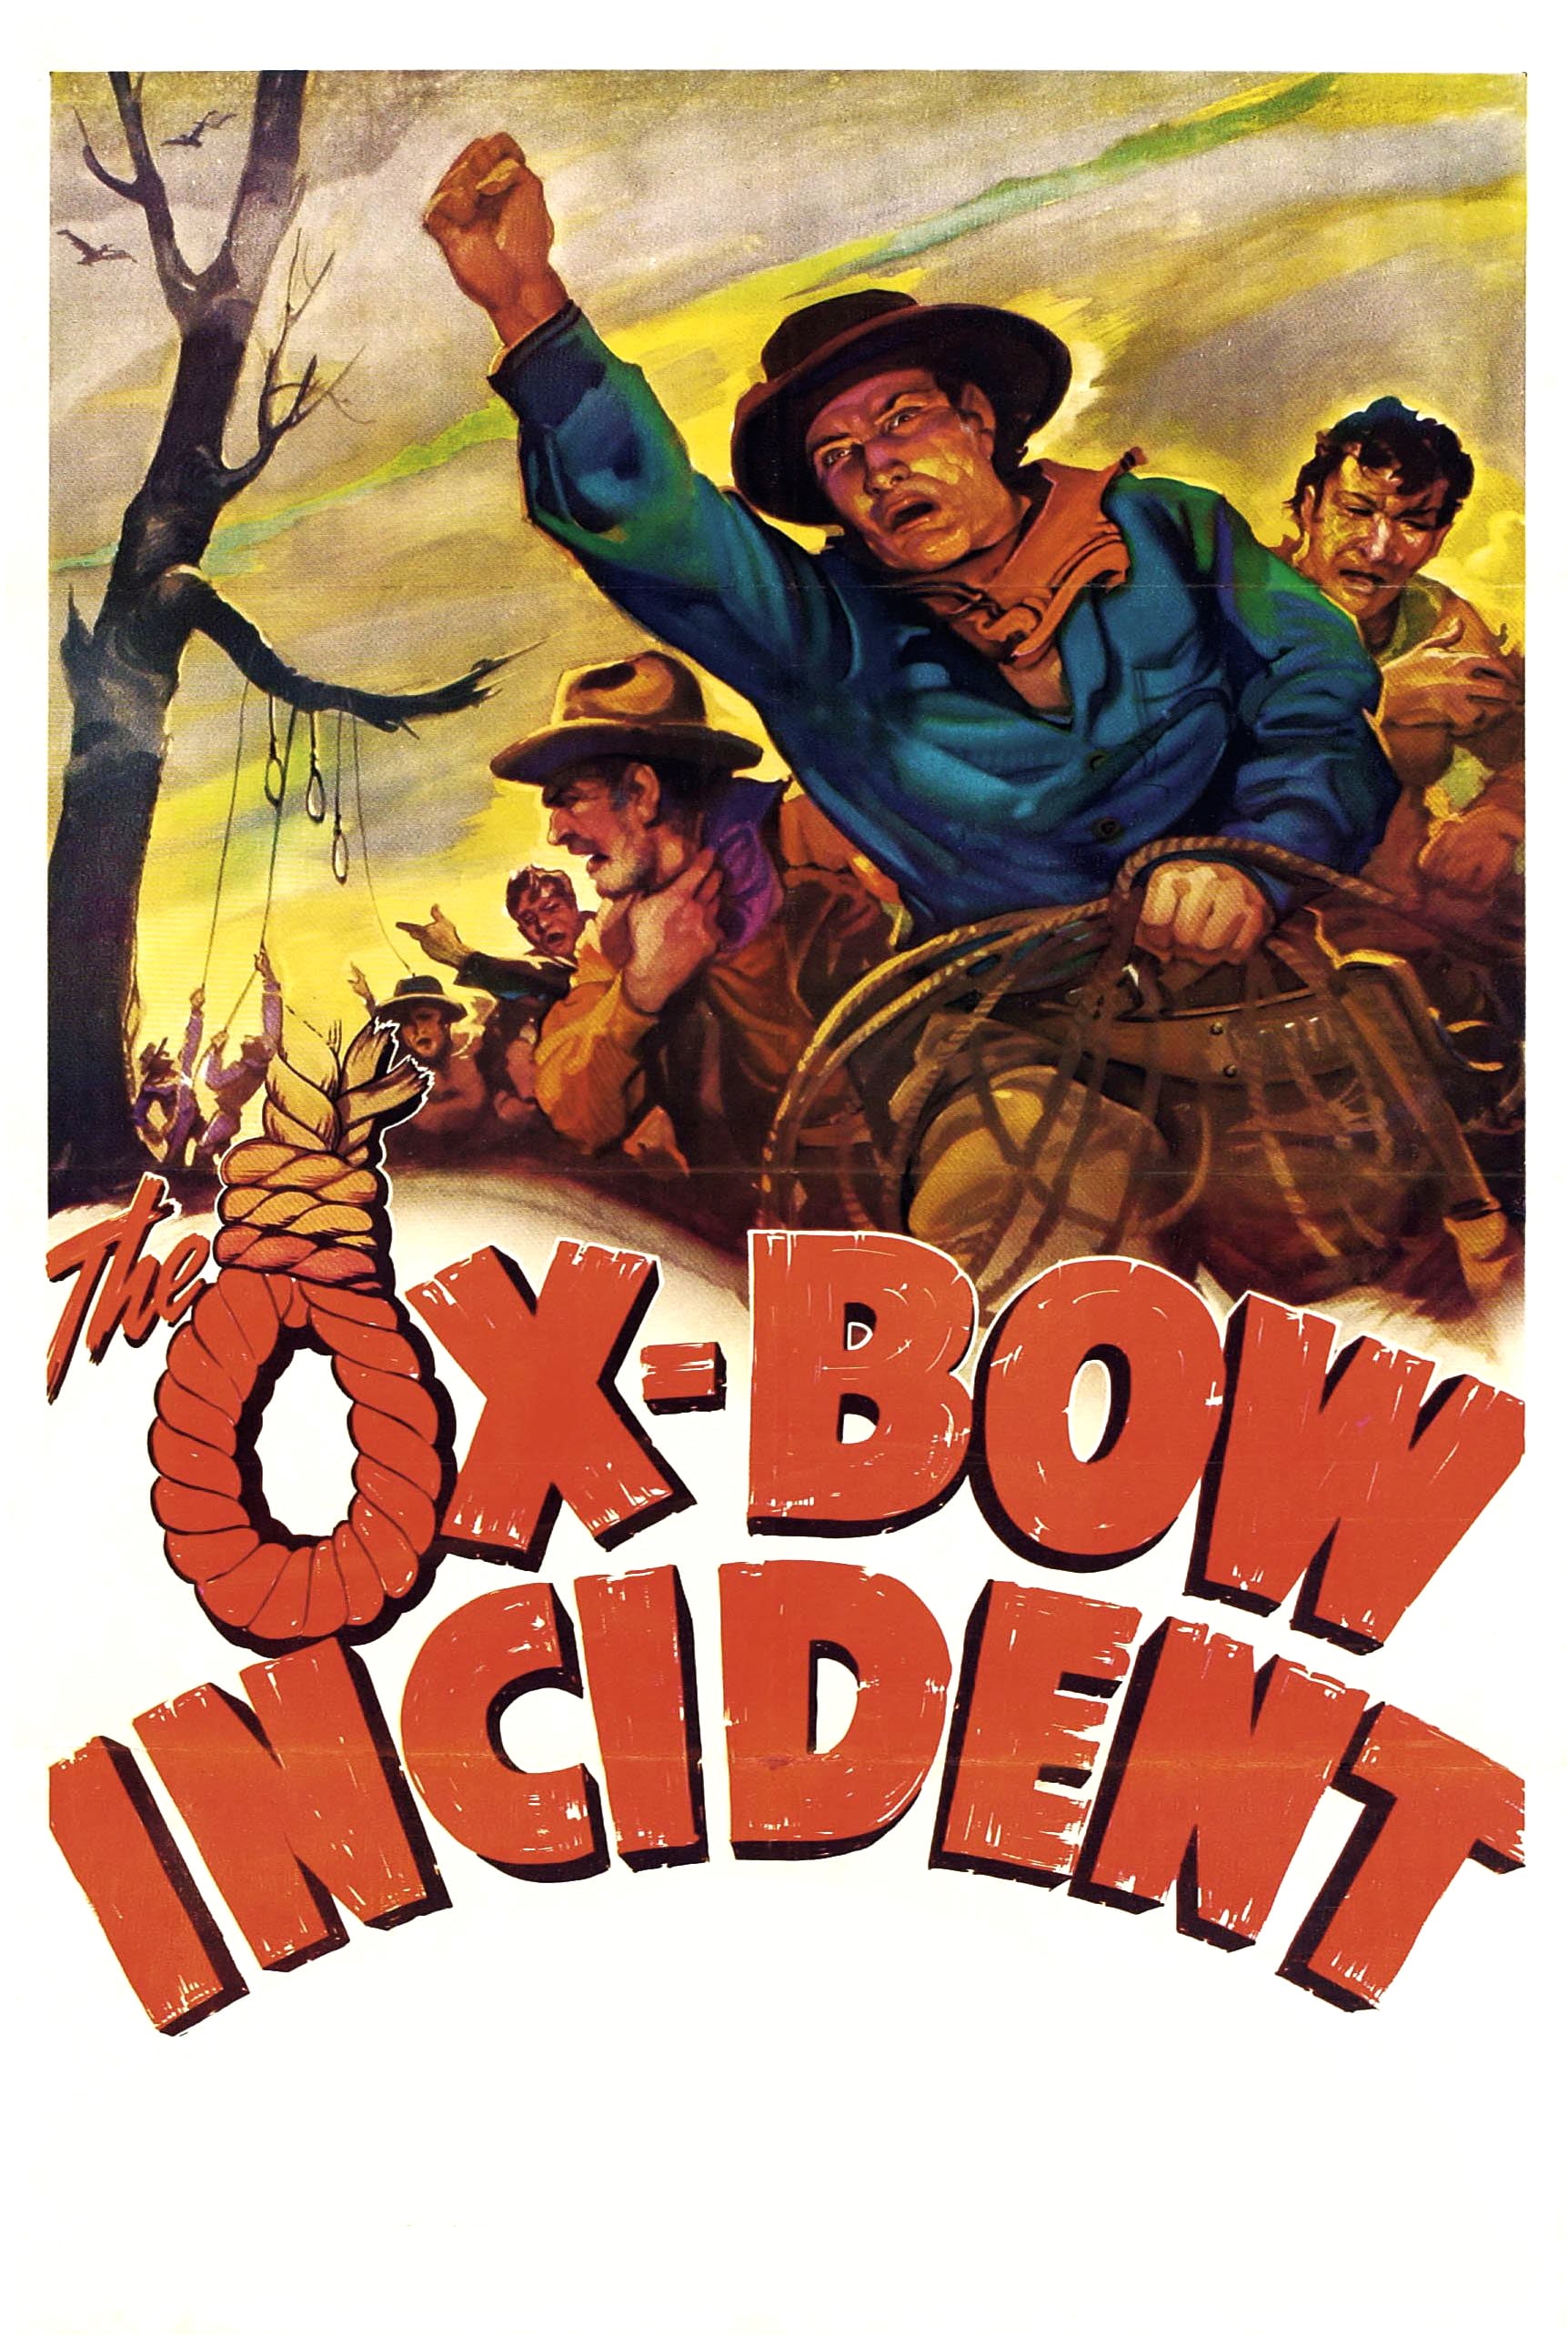 The Ox-Bow Incident - The Ox-Bow Incident